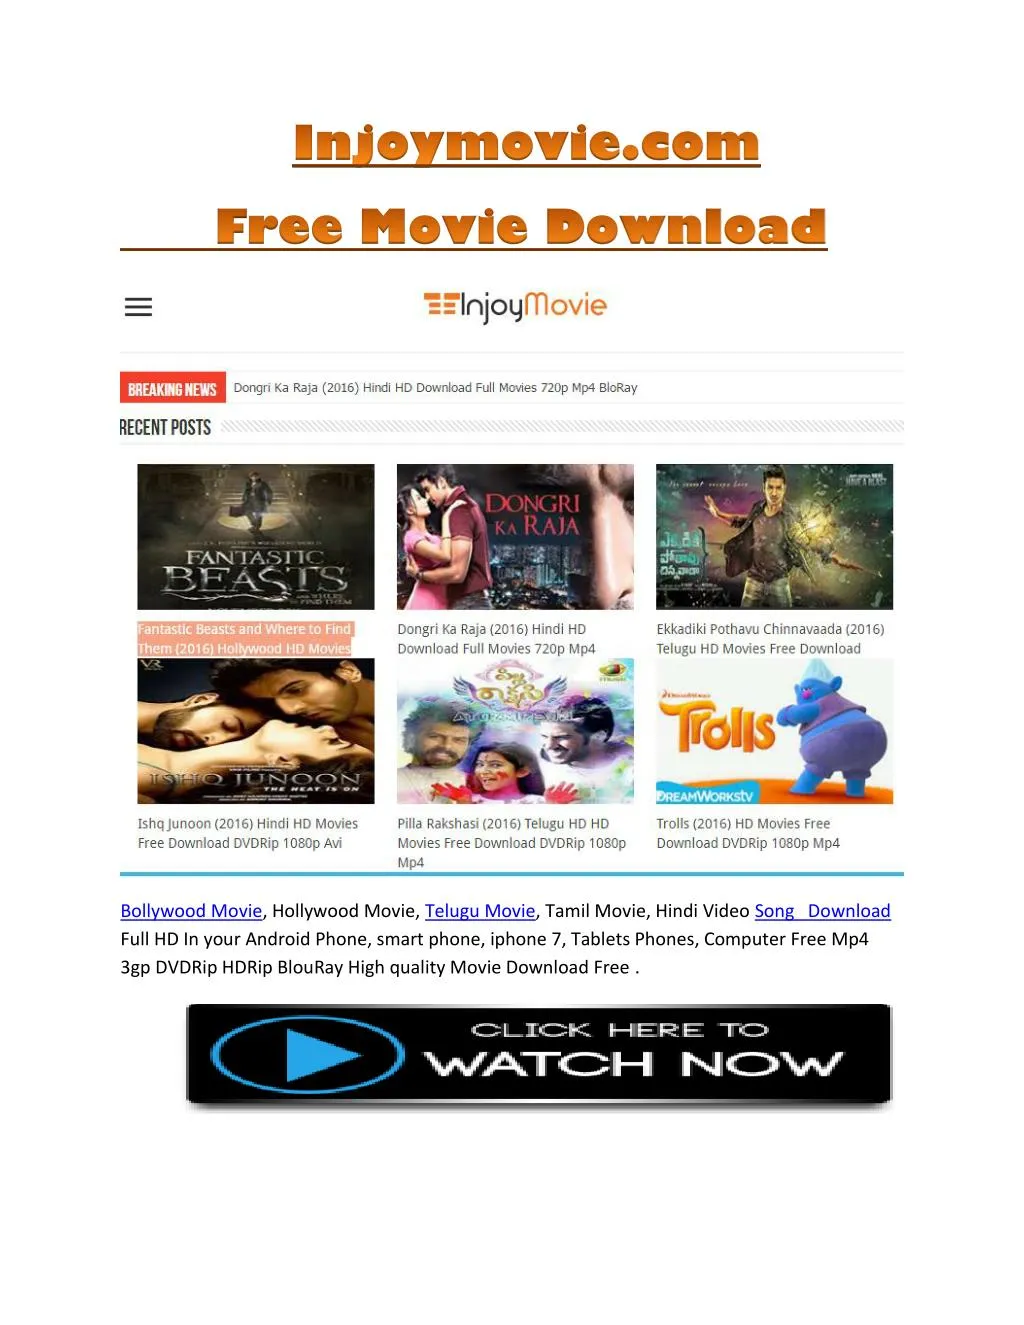 chase gasaway recommends 1080p movies free download pic